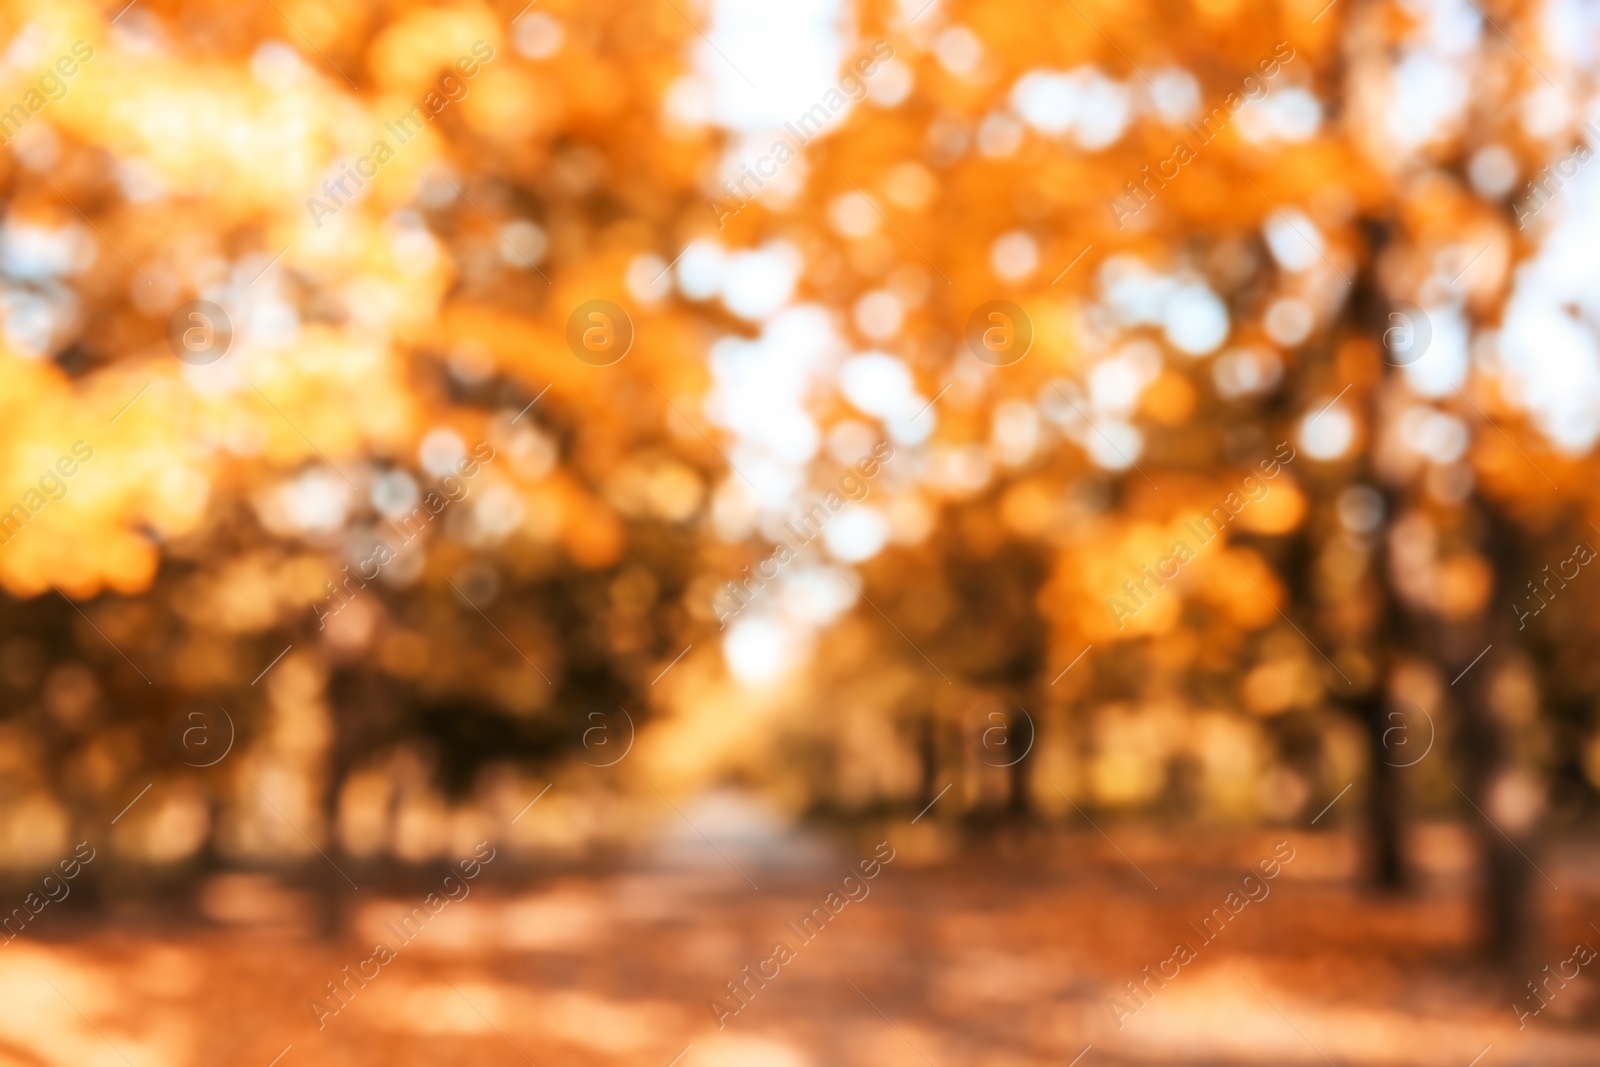 Photo of Blurred view of trees with bright leaves in park. Autumn landscape